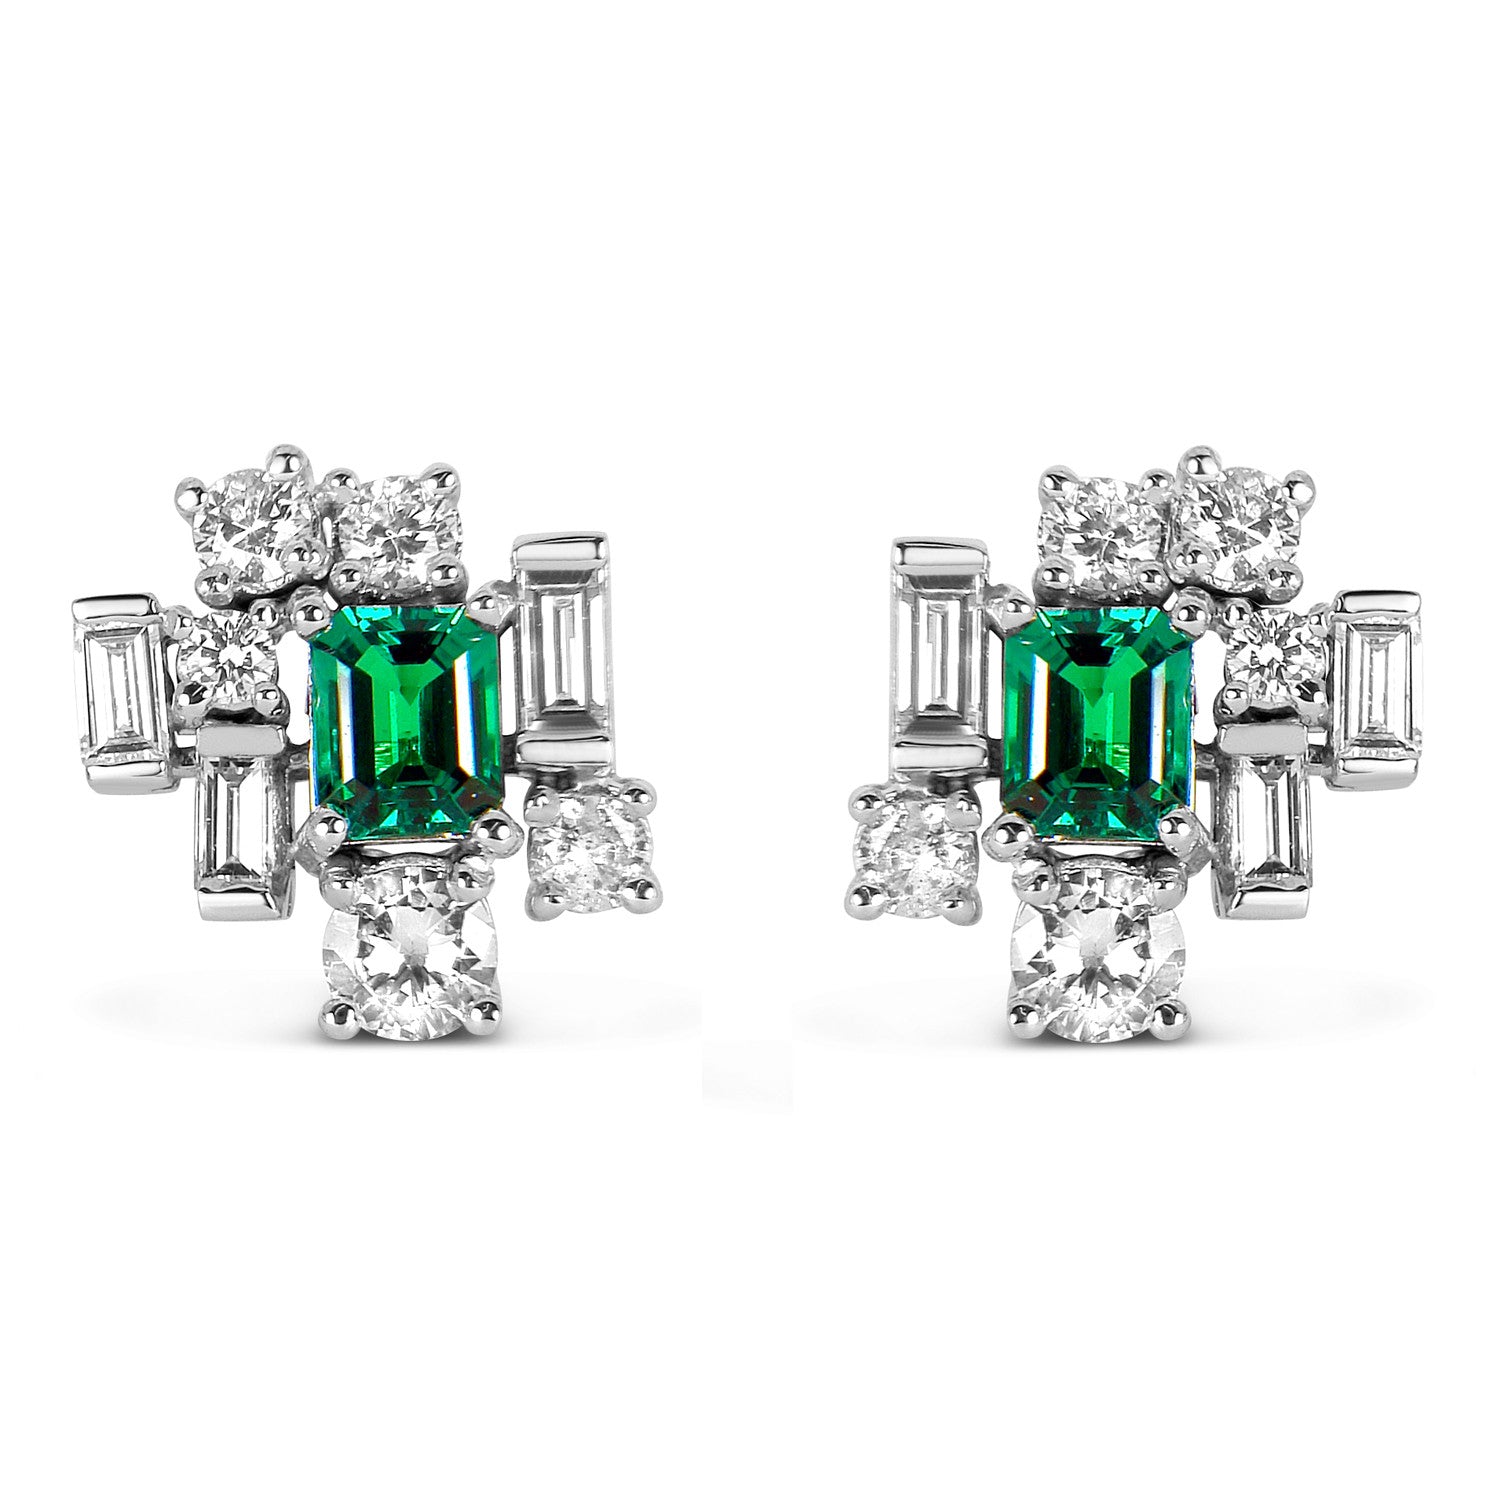 Bespoke Corene Art Deco earrings - recycled diamonds, recycled emeralds and recycled white gold